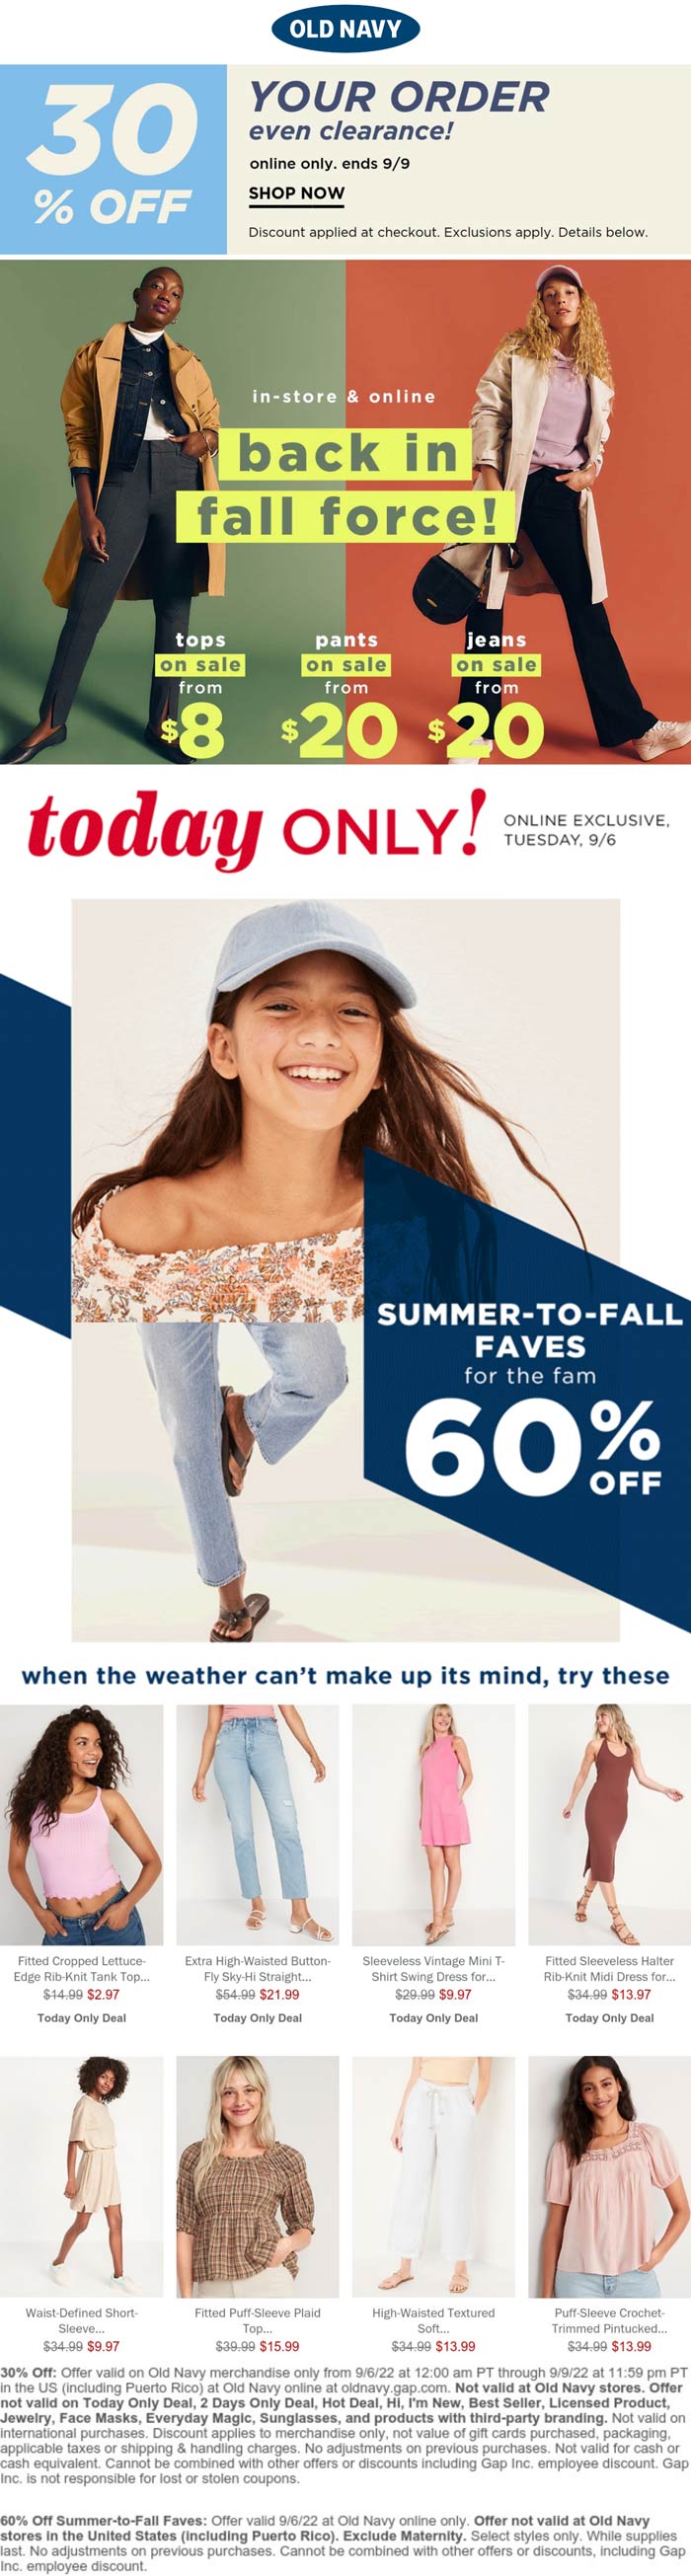 Old Navy stores Coupon  60% off summer fall faves today at Old Navy #oldnavy 